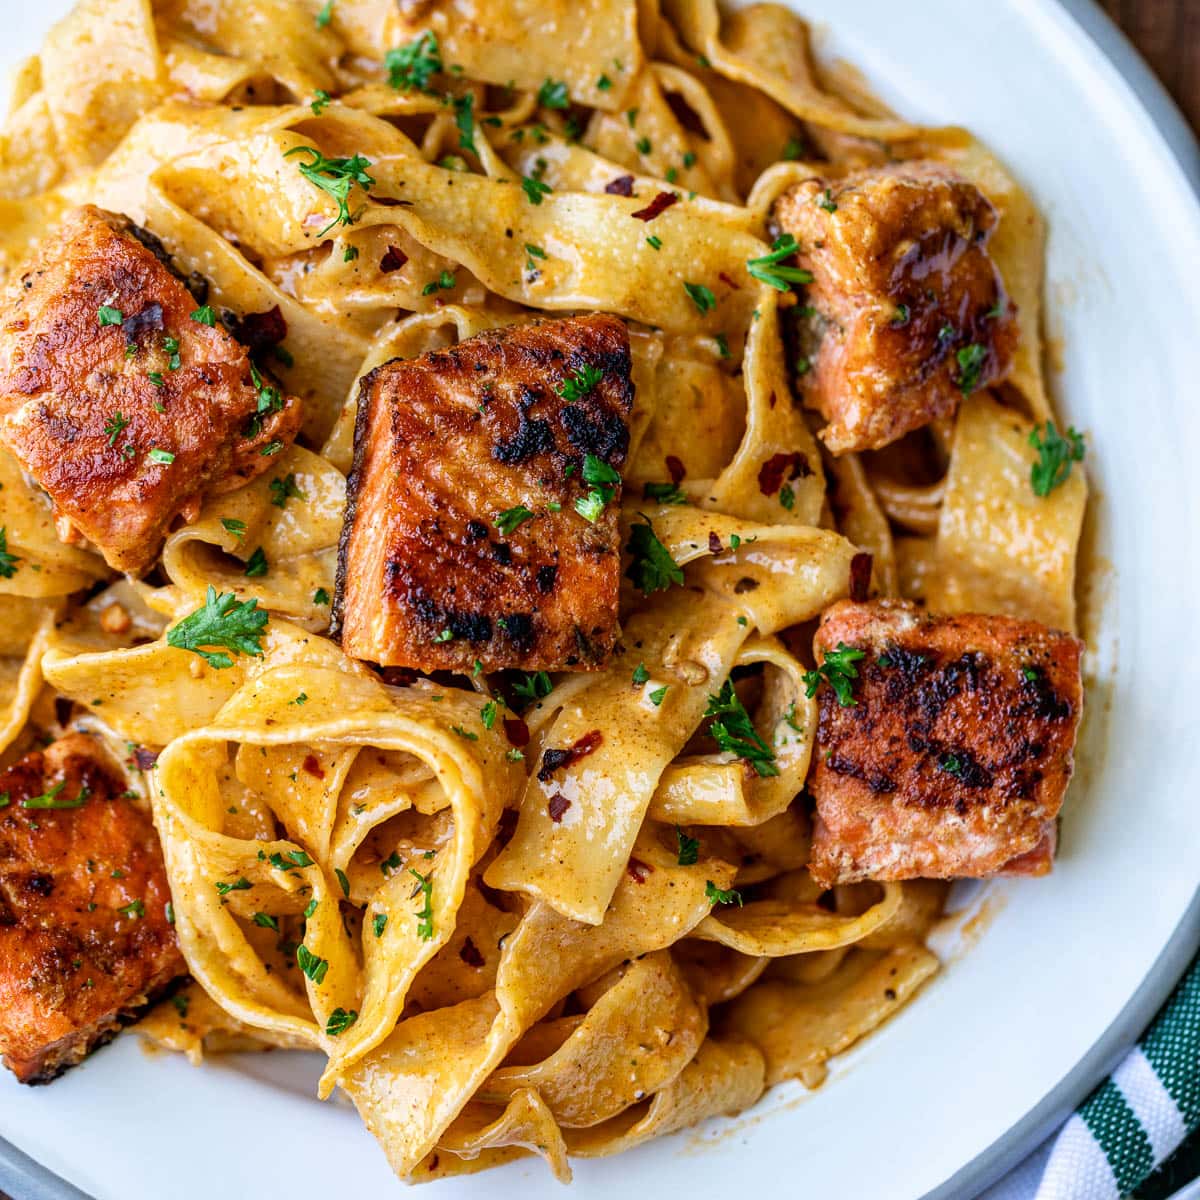 Cajun Pasta With Salmon plated with fresh herbs.